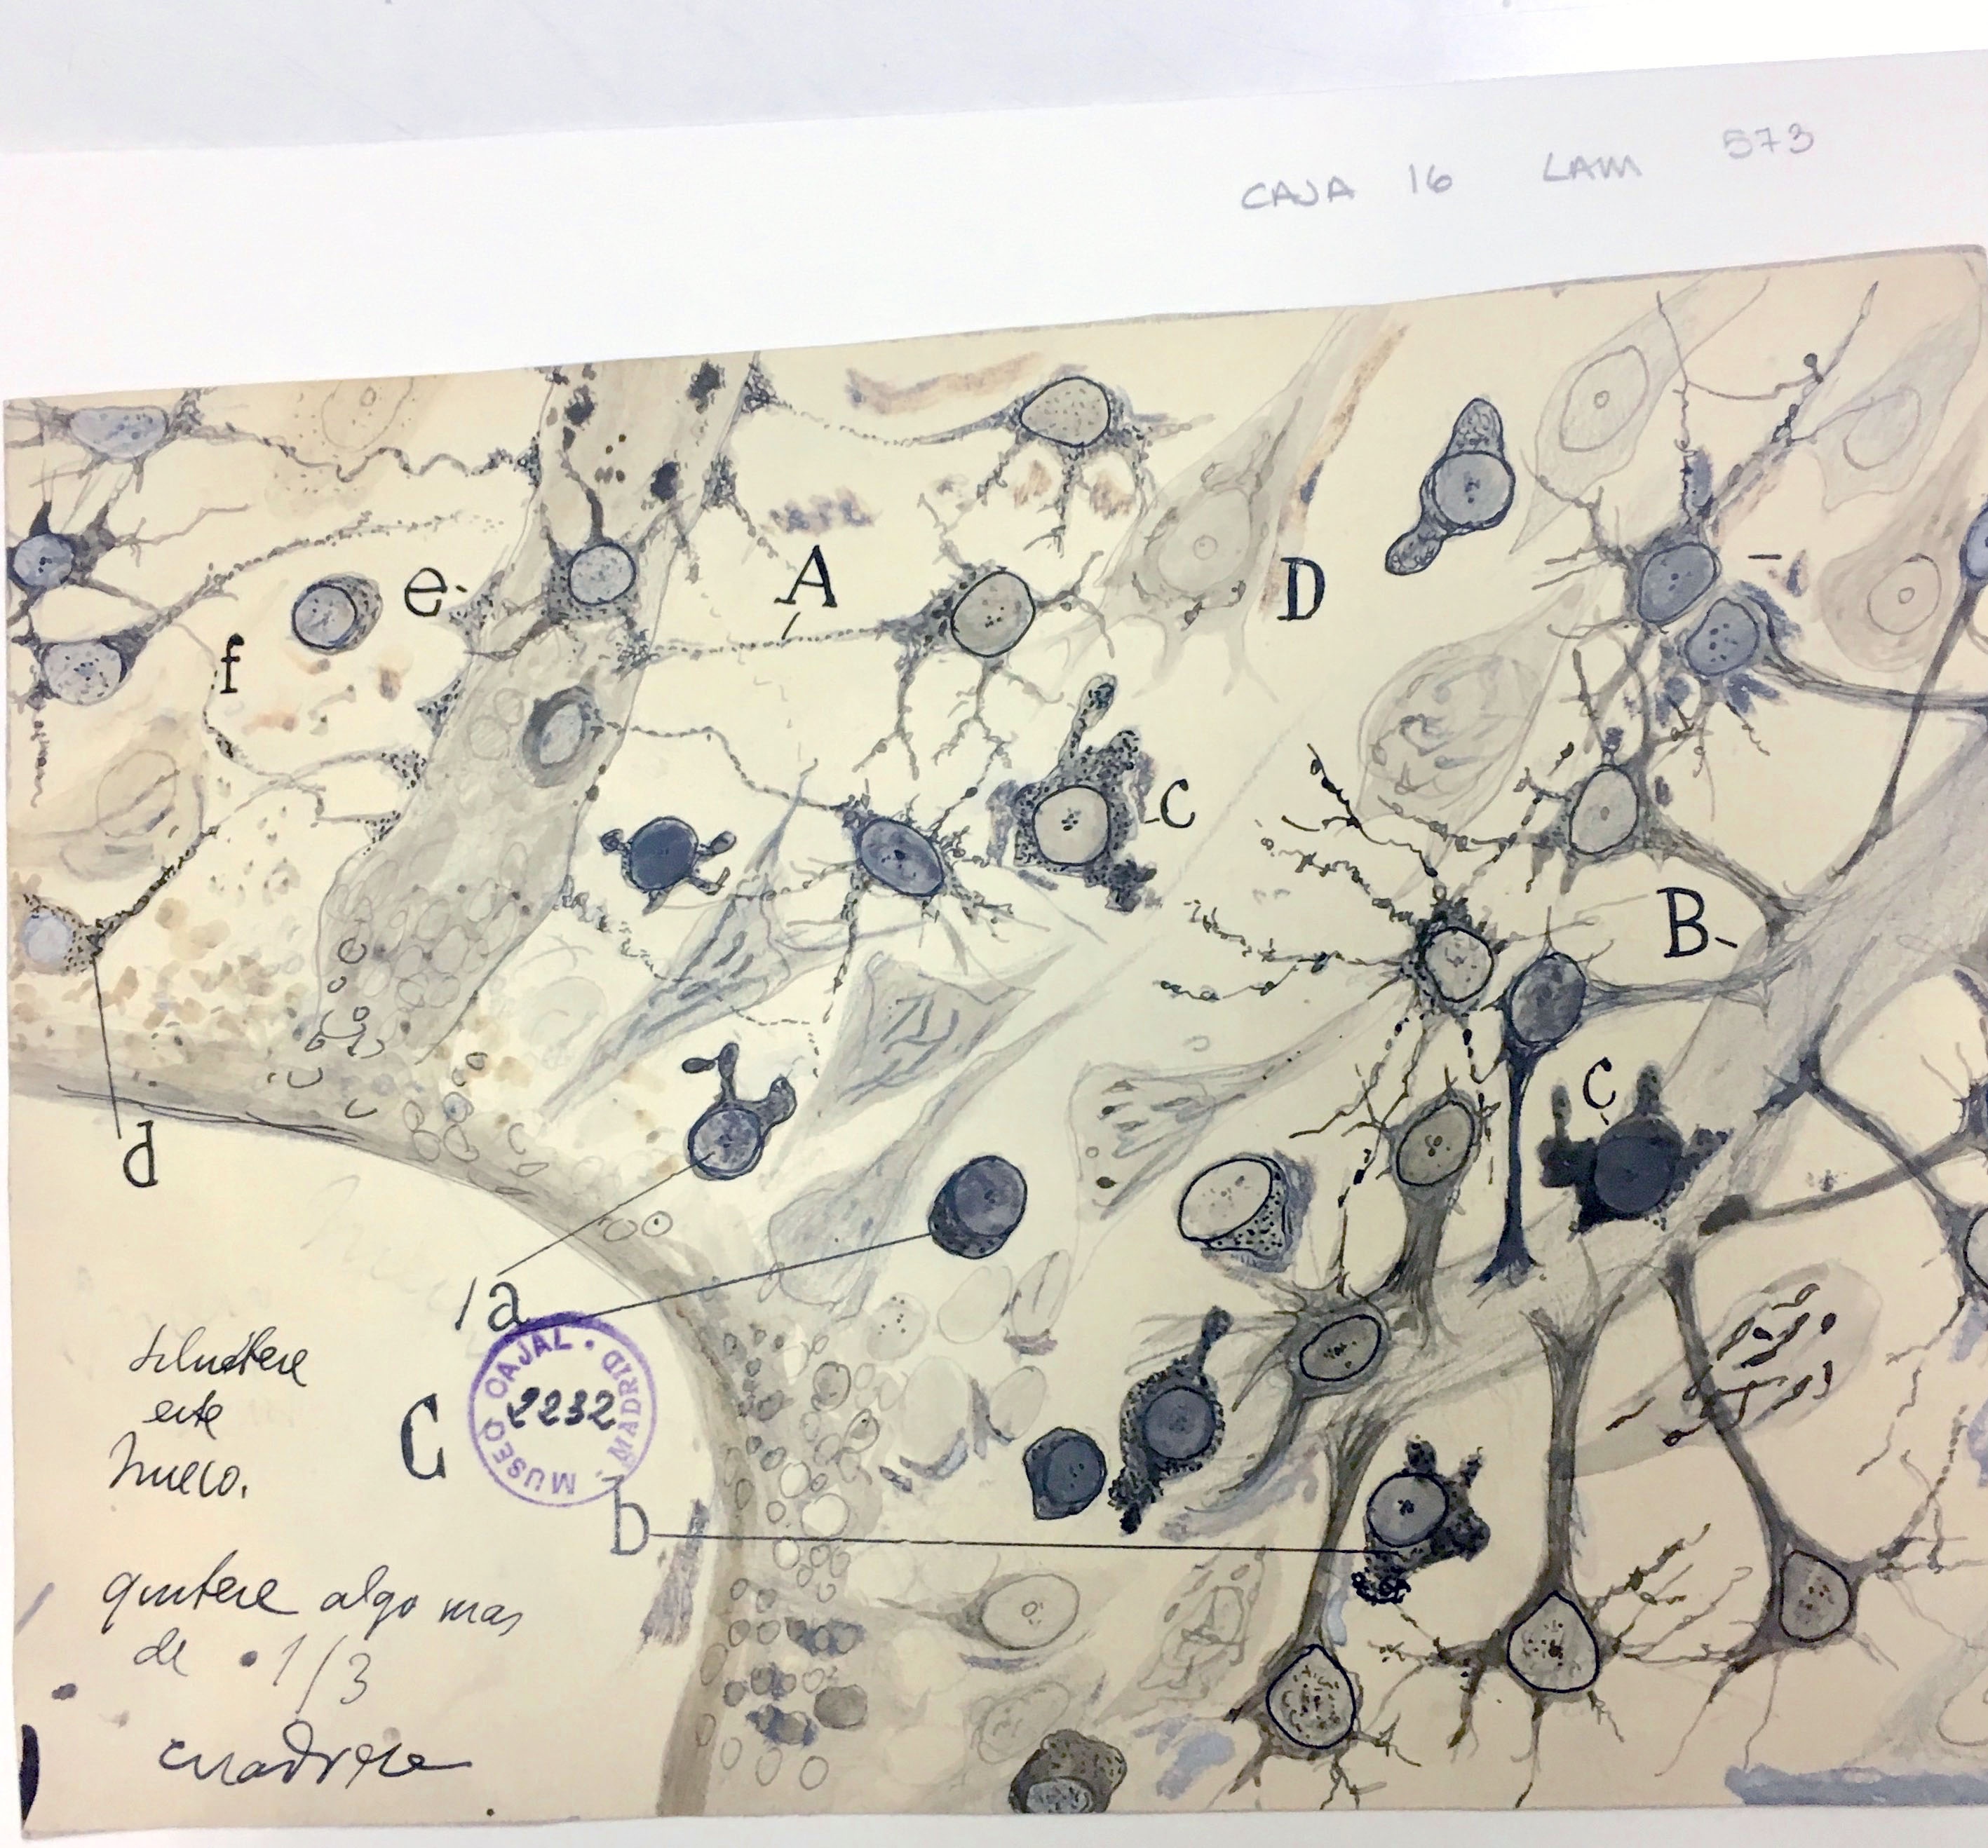 Hand-drawn illustration of astrocytes at the border of a wound